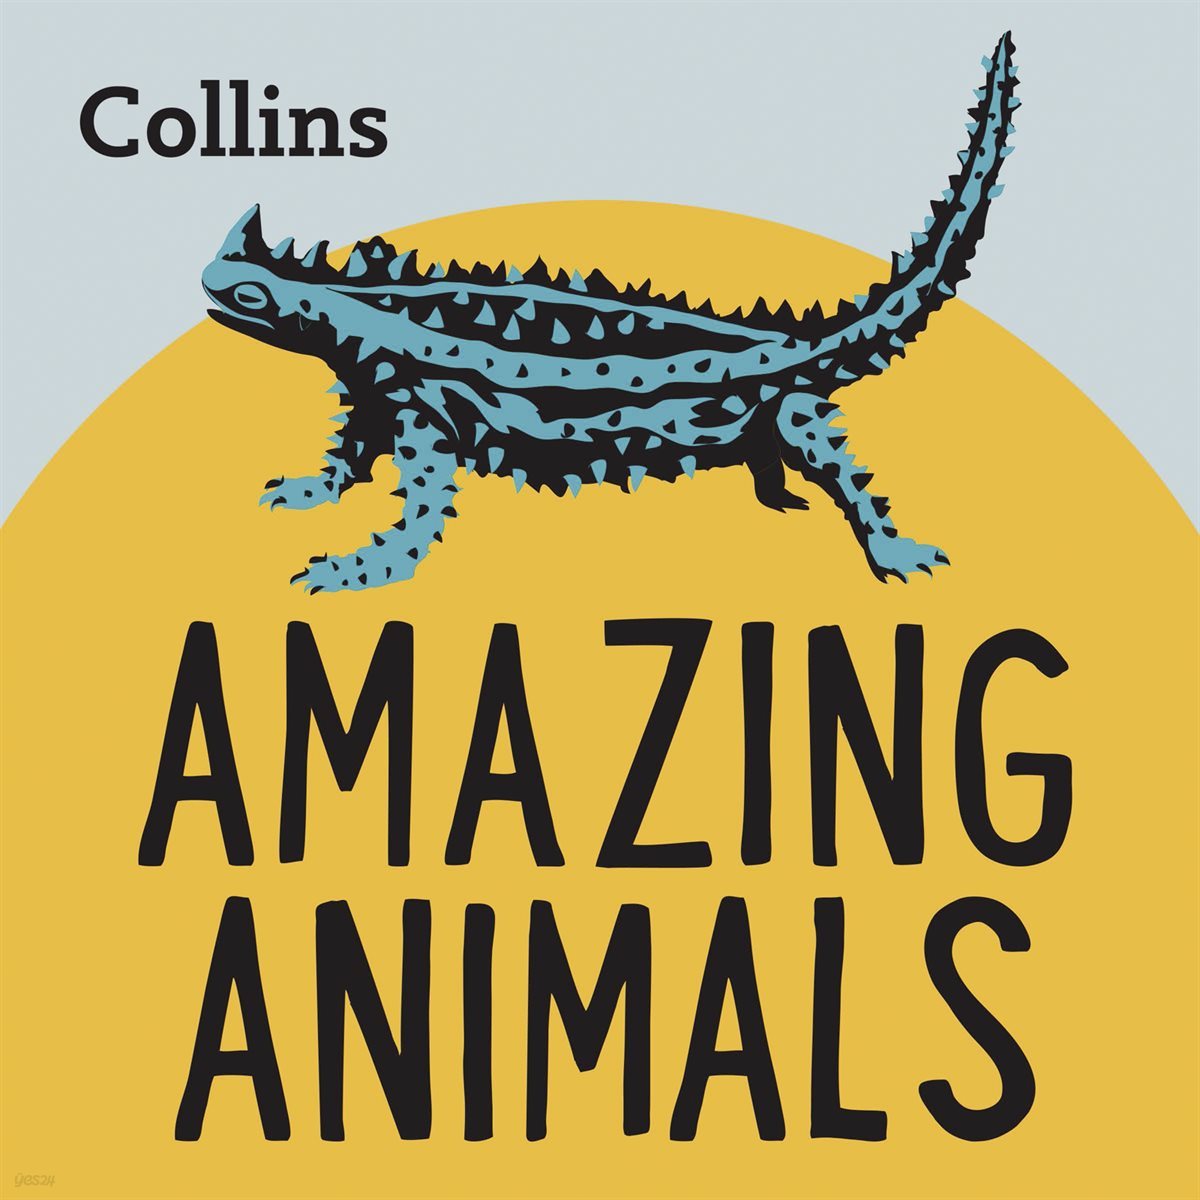 [US Eng] AMAZING ANIMALS: For ages 7-11 -Collins